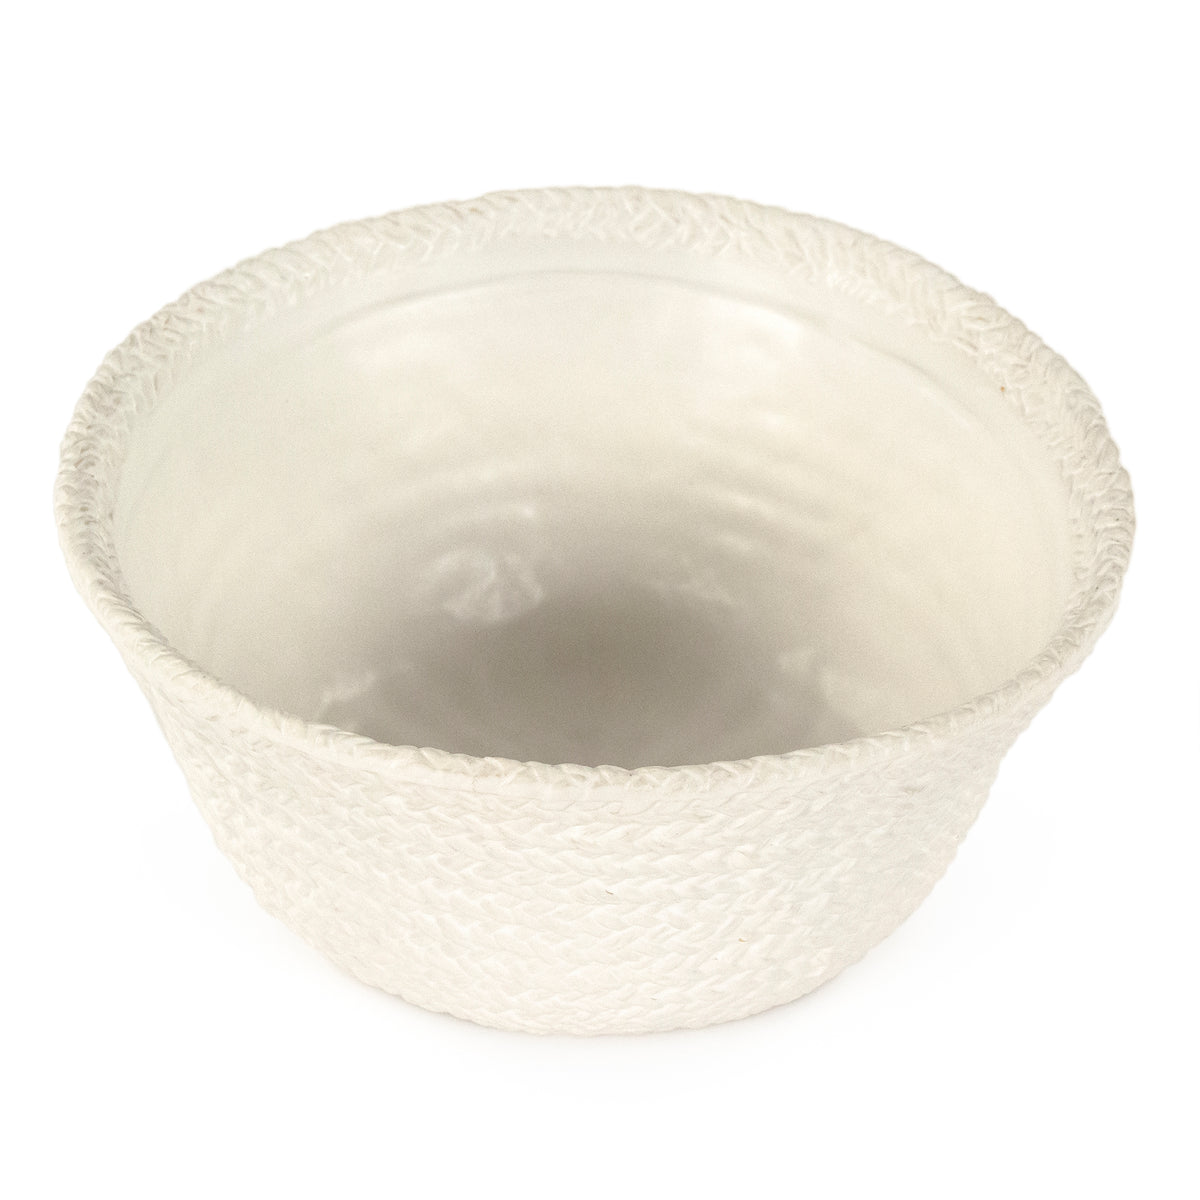 White Cross Weave Bowl Small by Zentique